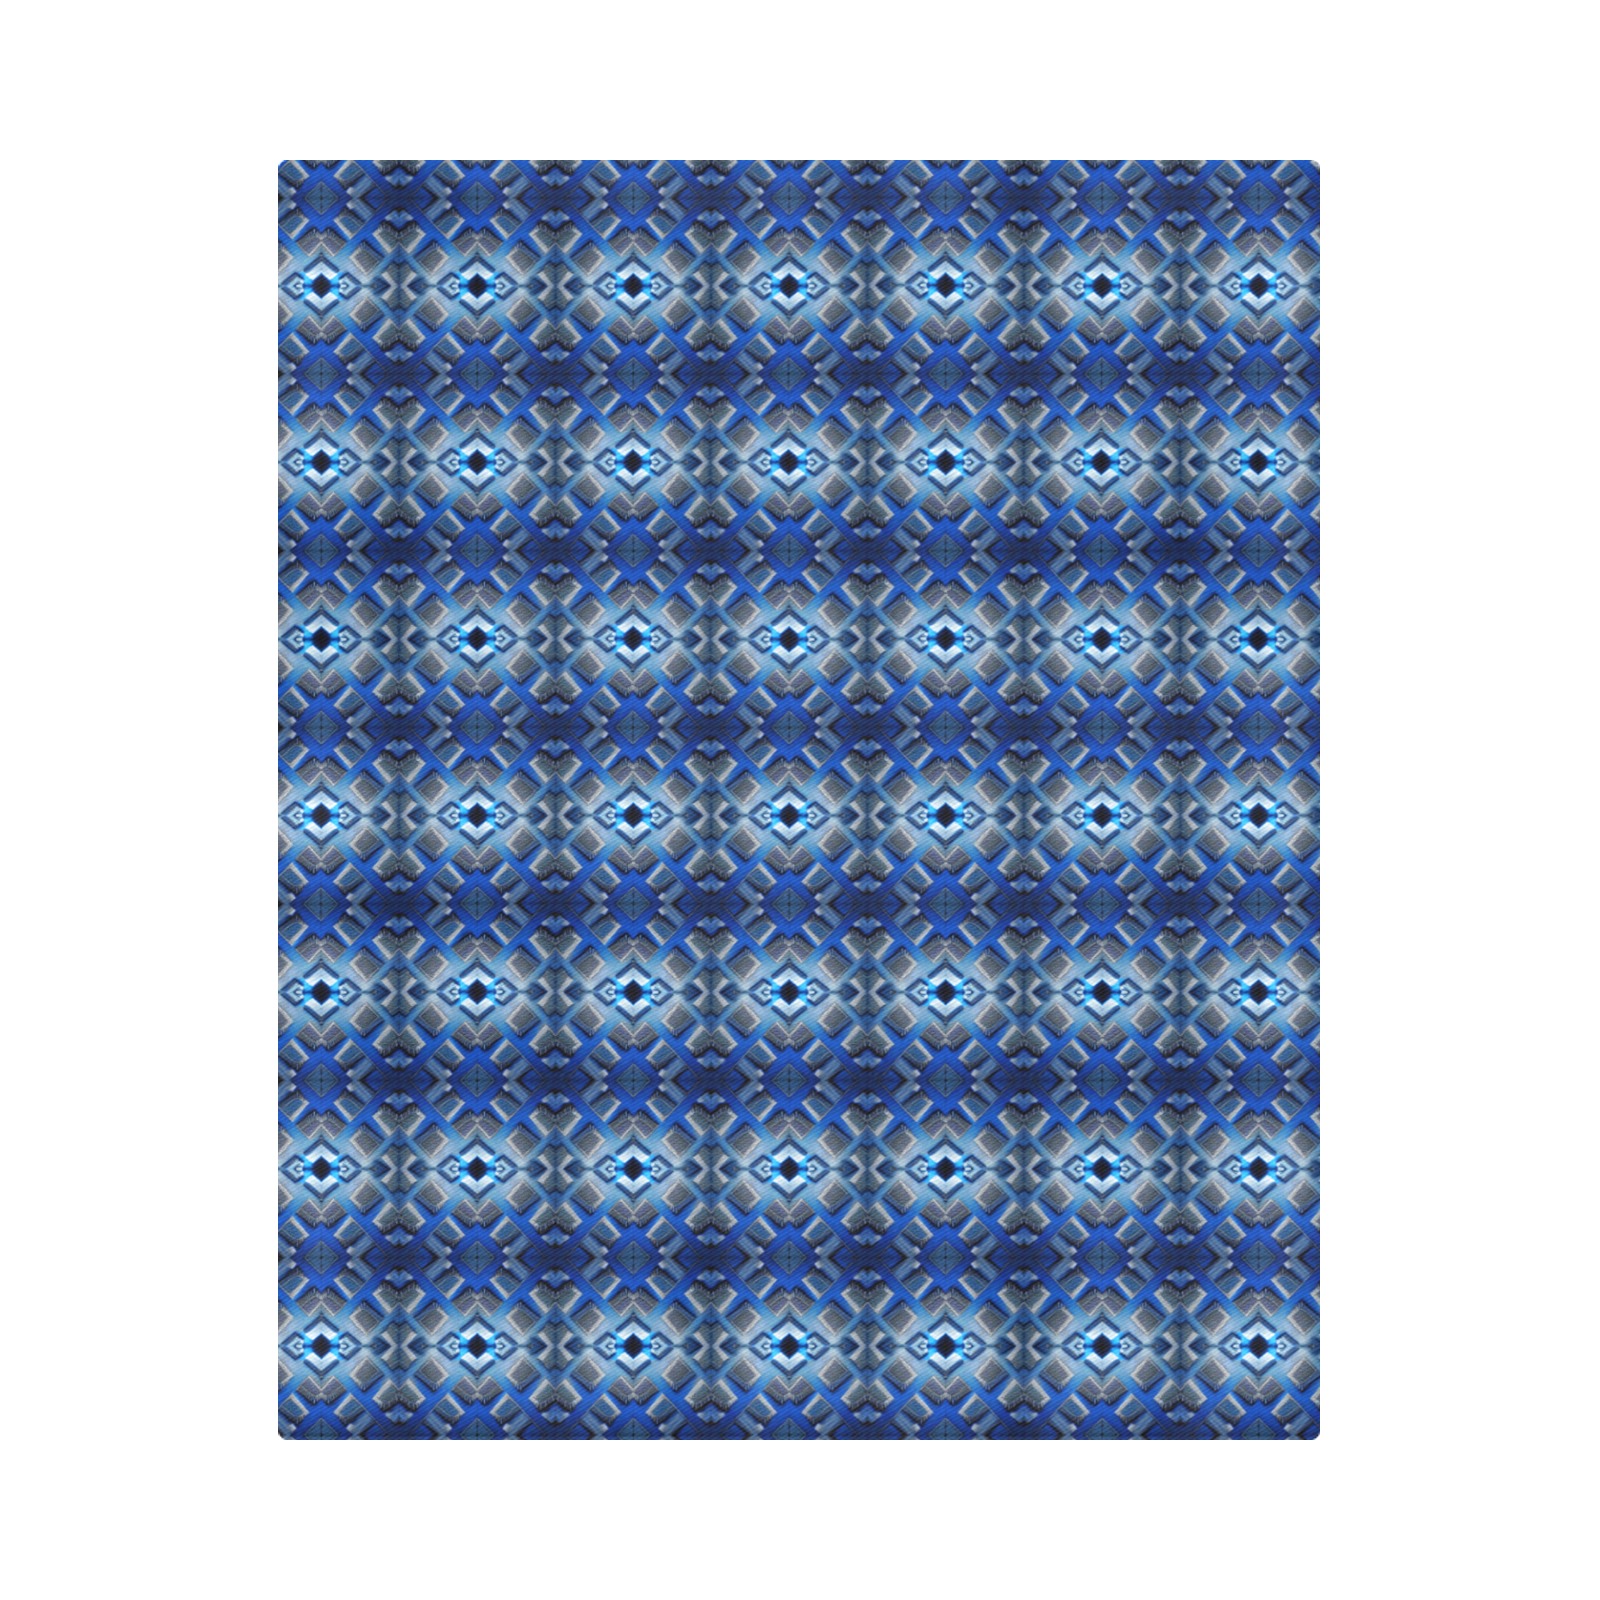 blue and white repeating pattern Duvet Cover 86"x70" ( All-over-print)